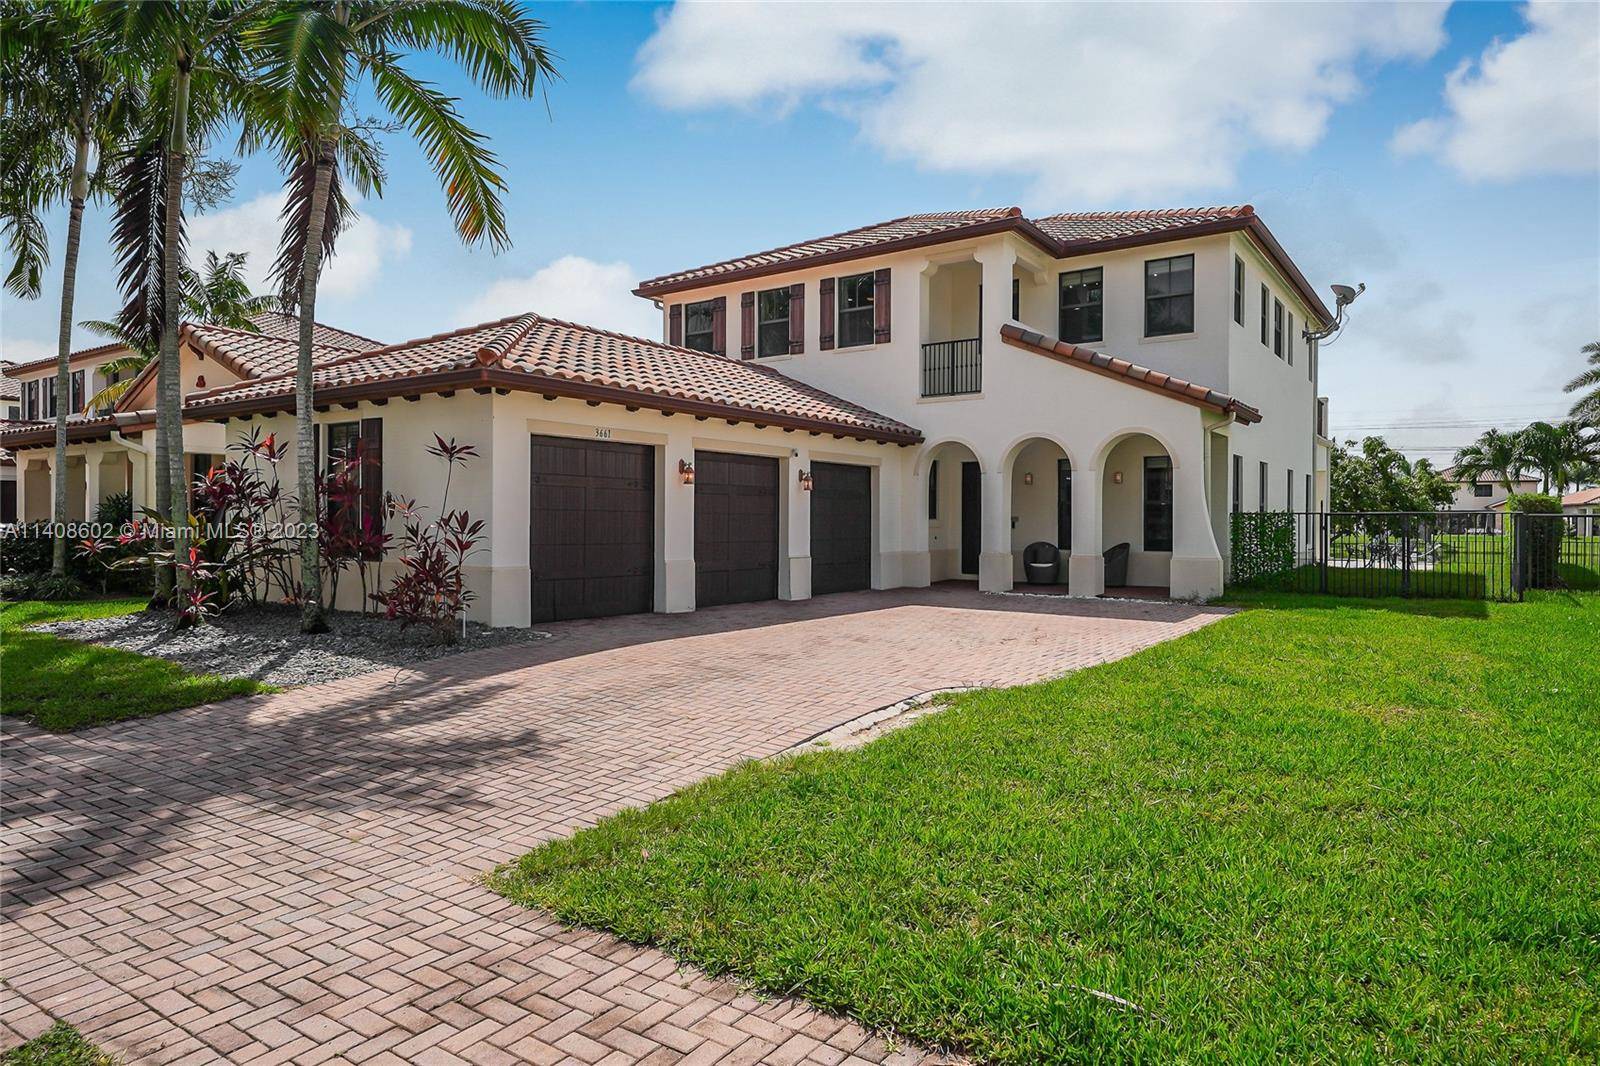 Welcome to your dream lakefront property located at 3661 NW 85 Ter, Cooper City, Florida.